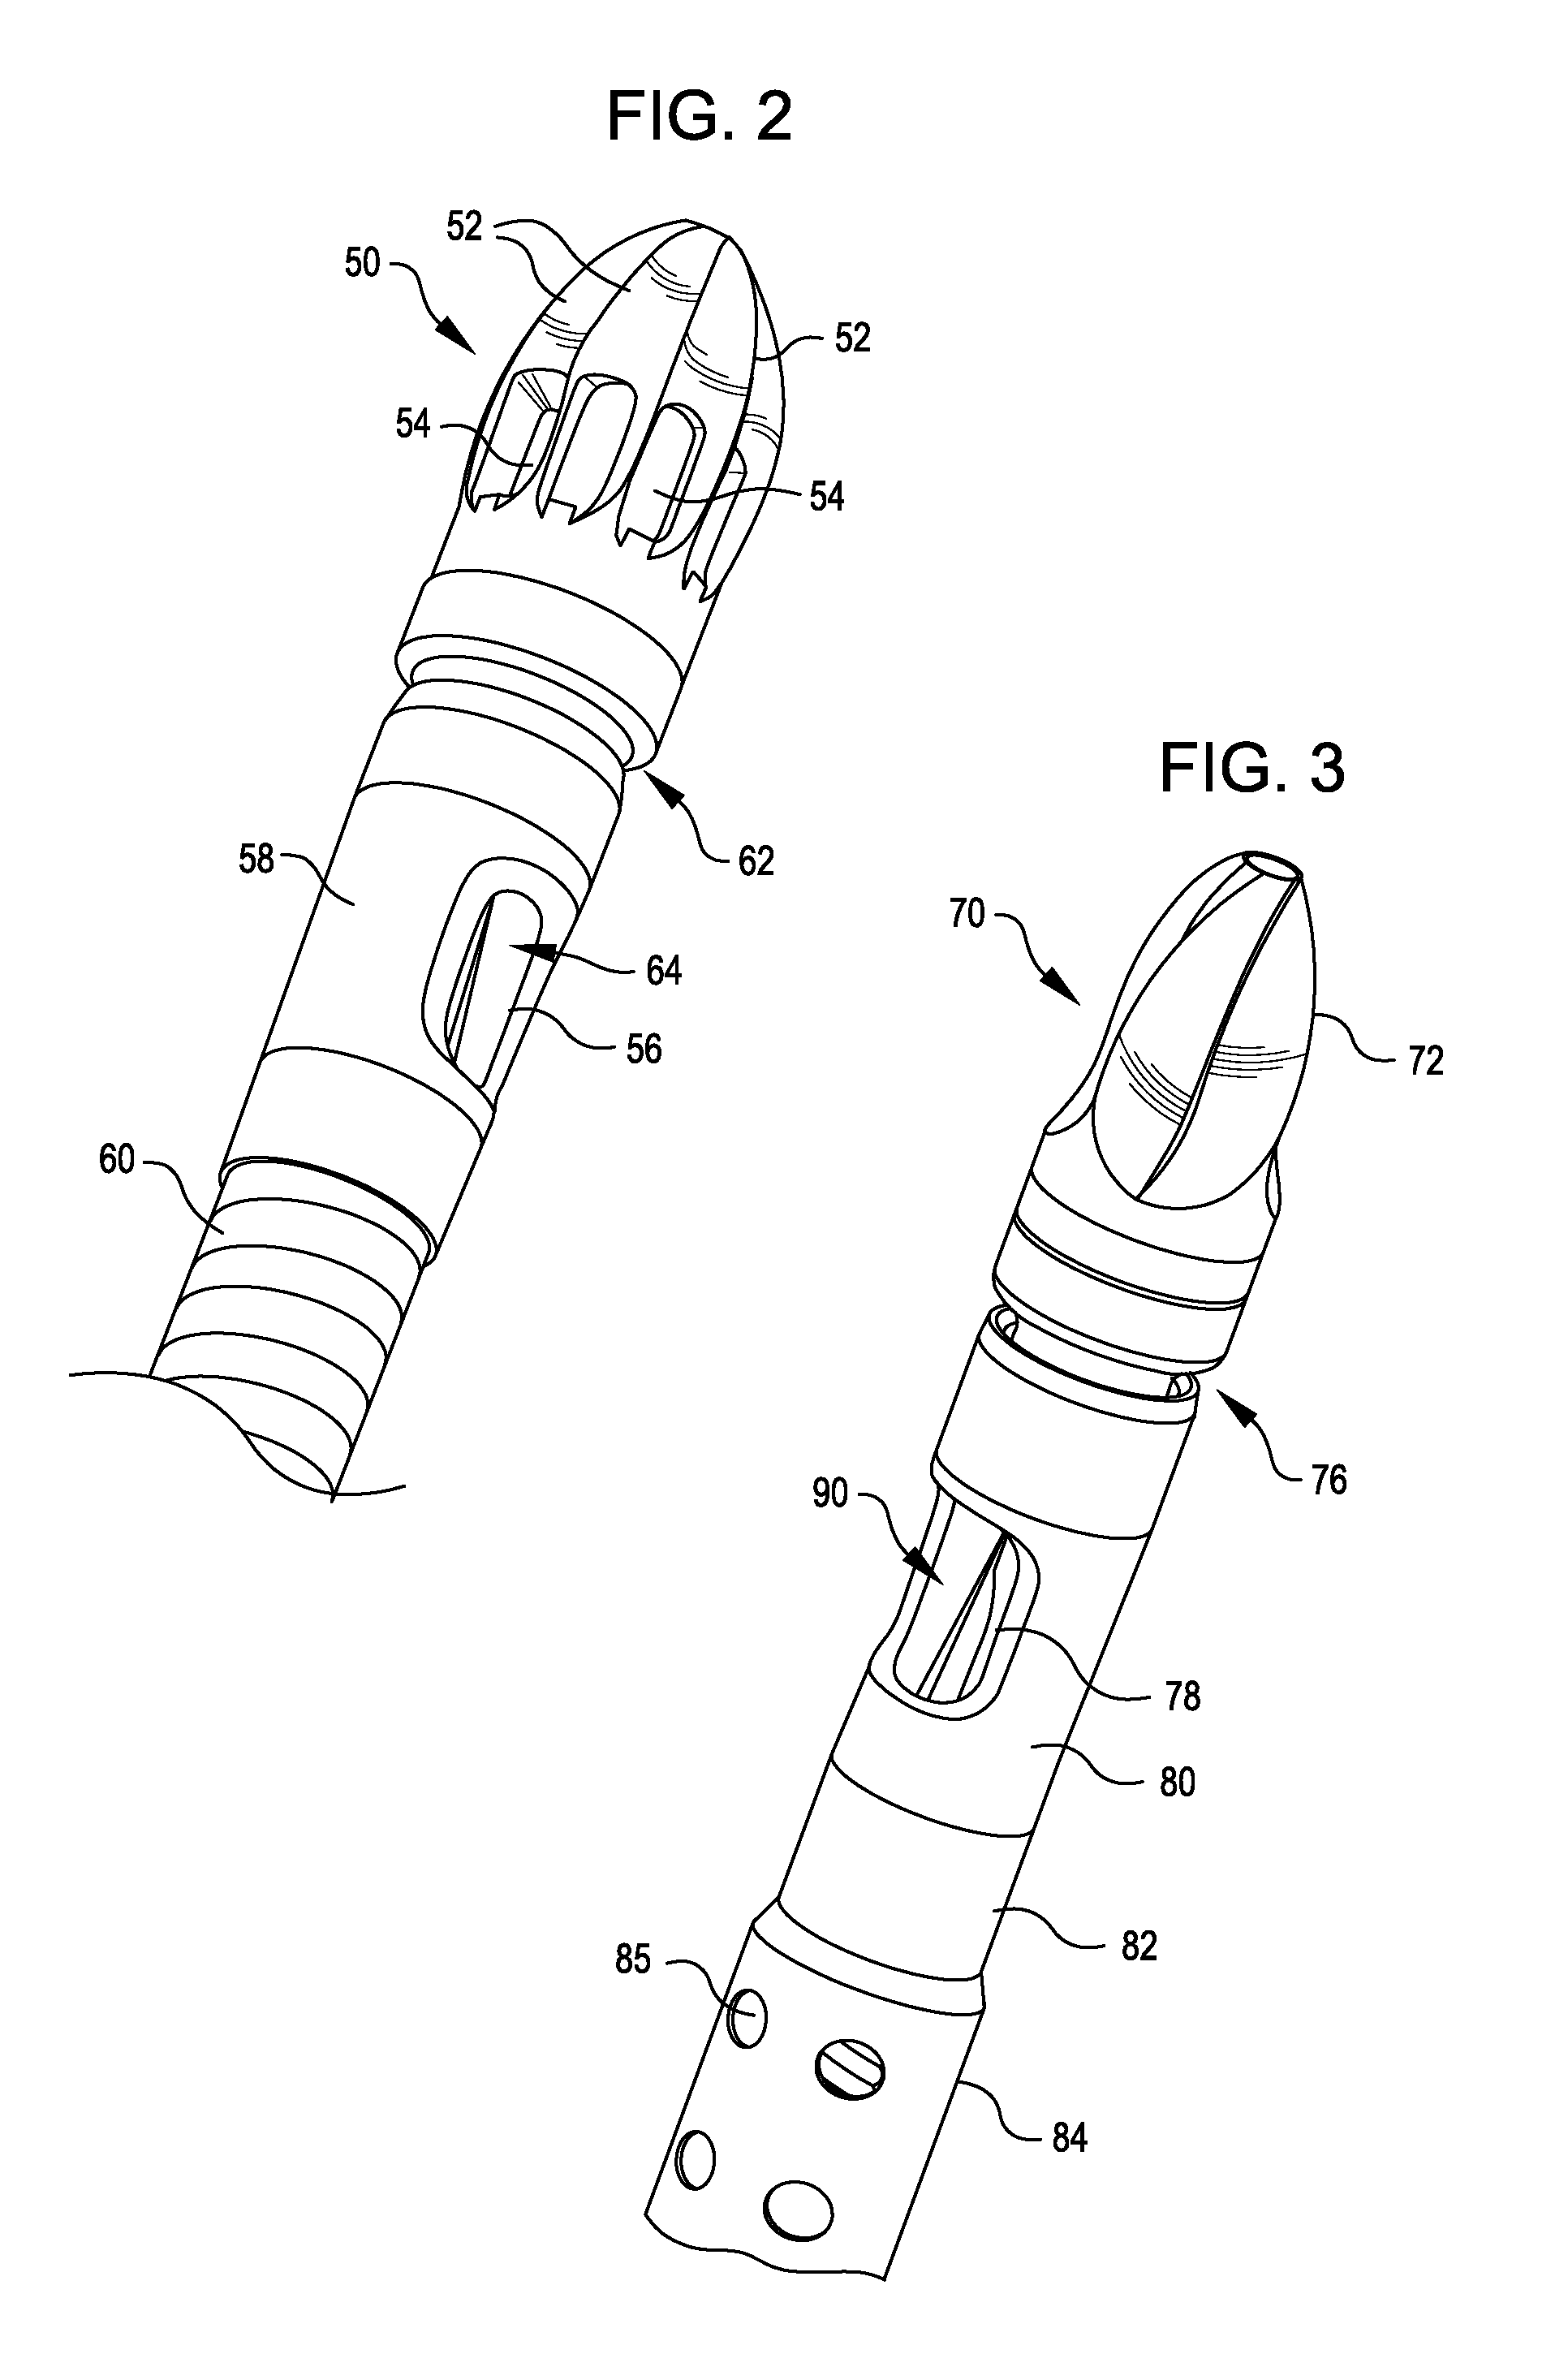 Interventional catheters incorporating an active aspiration system